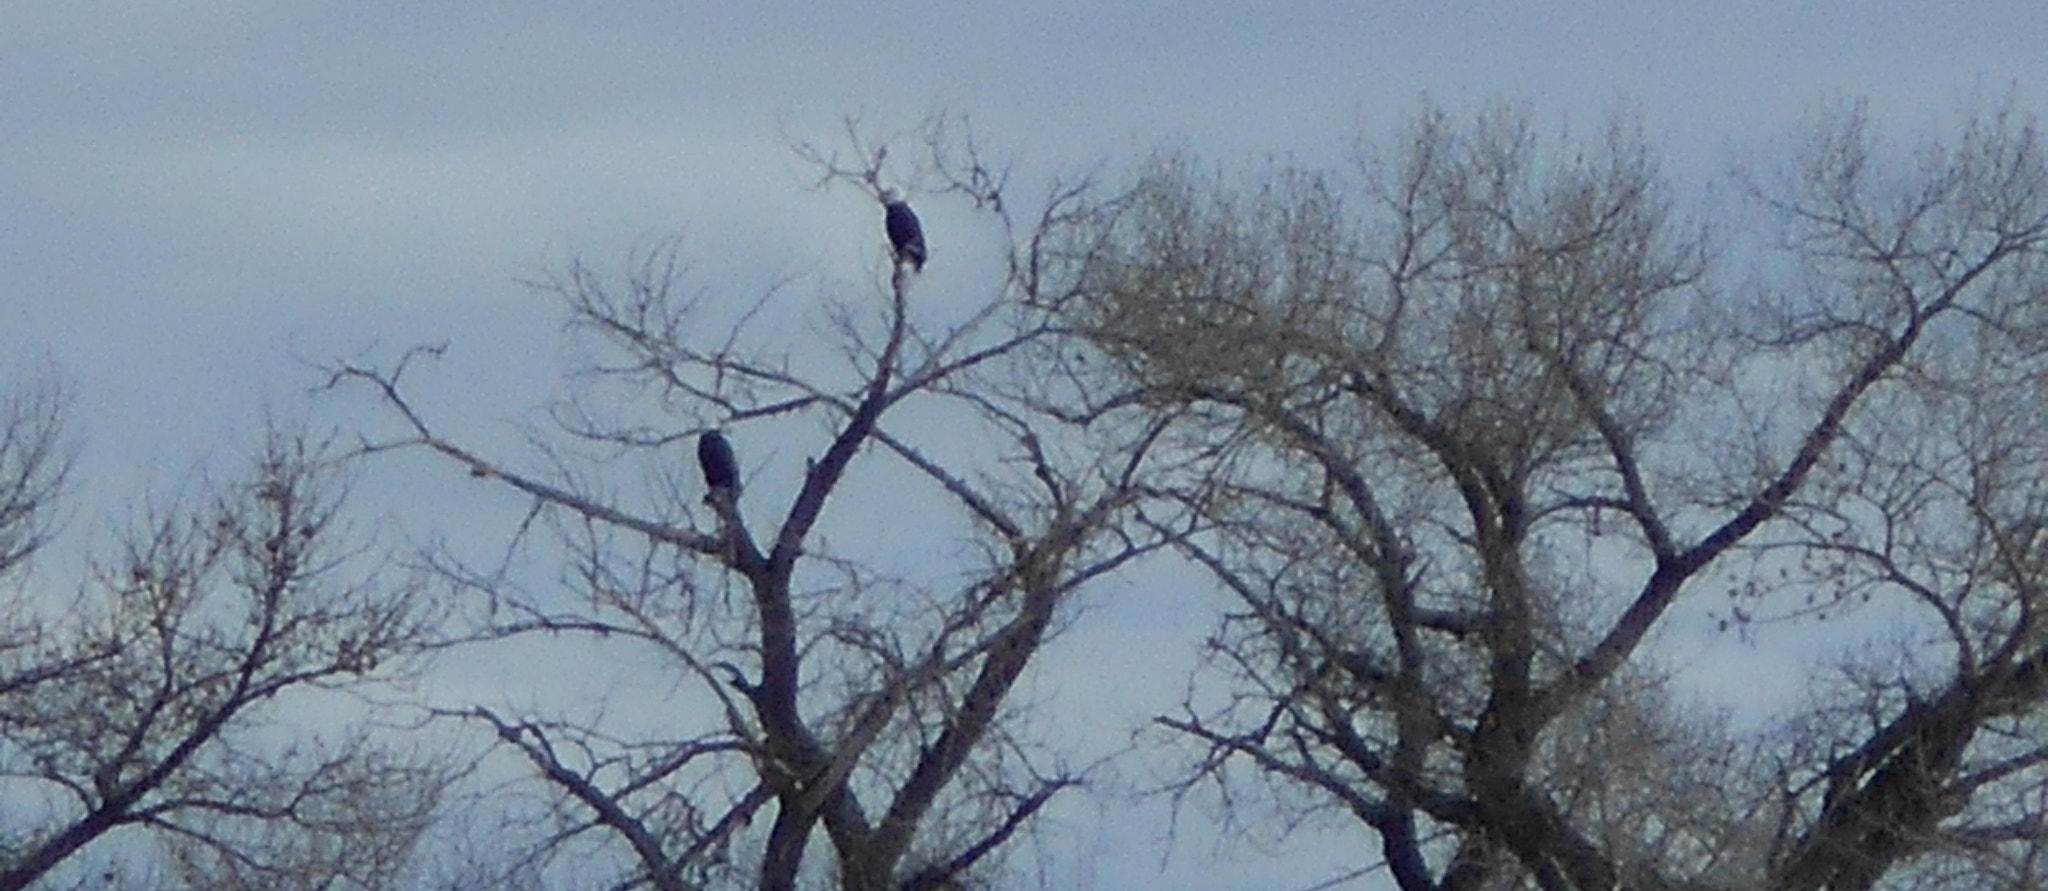 Nikon COOLPIX L30 sample photo. Eagles in tree photography